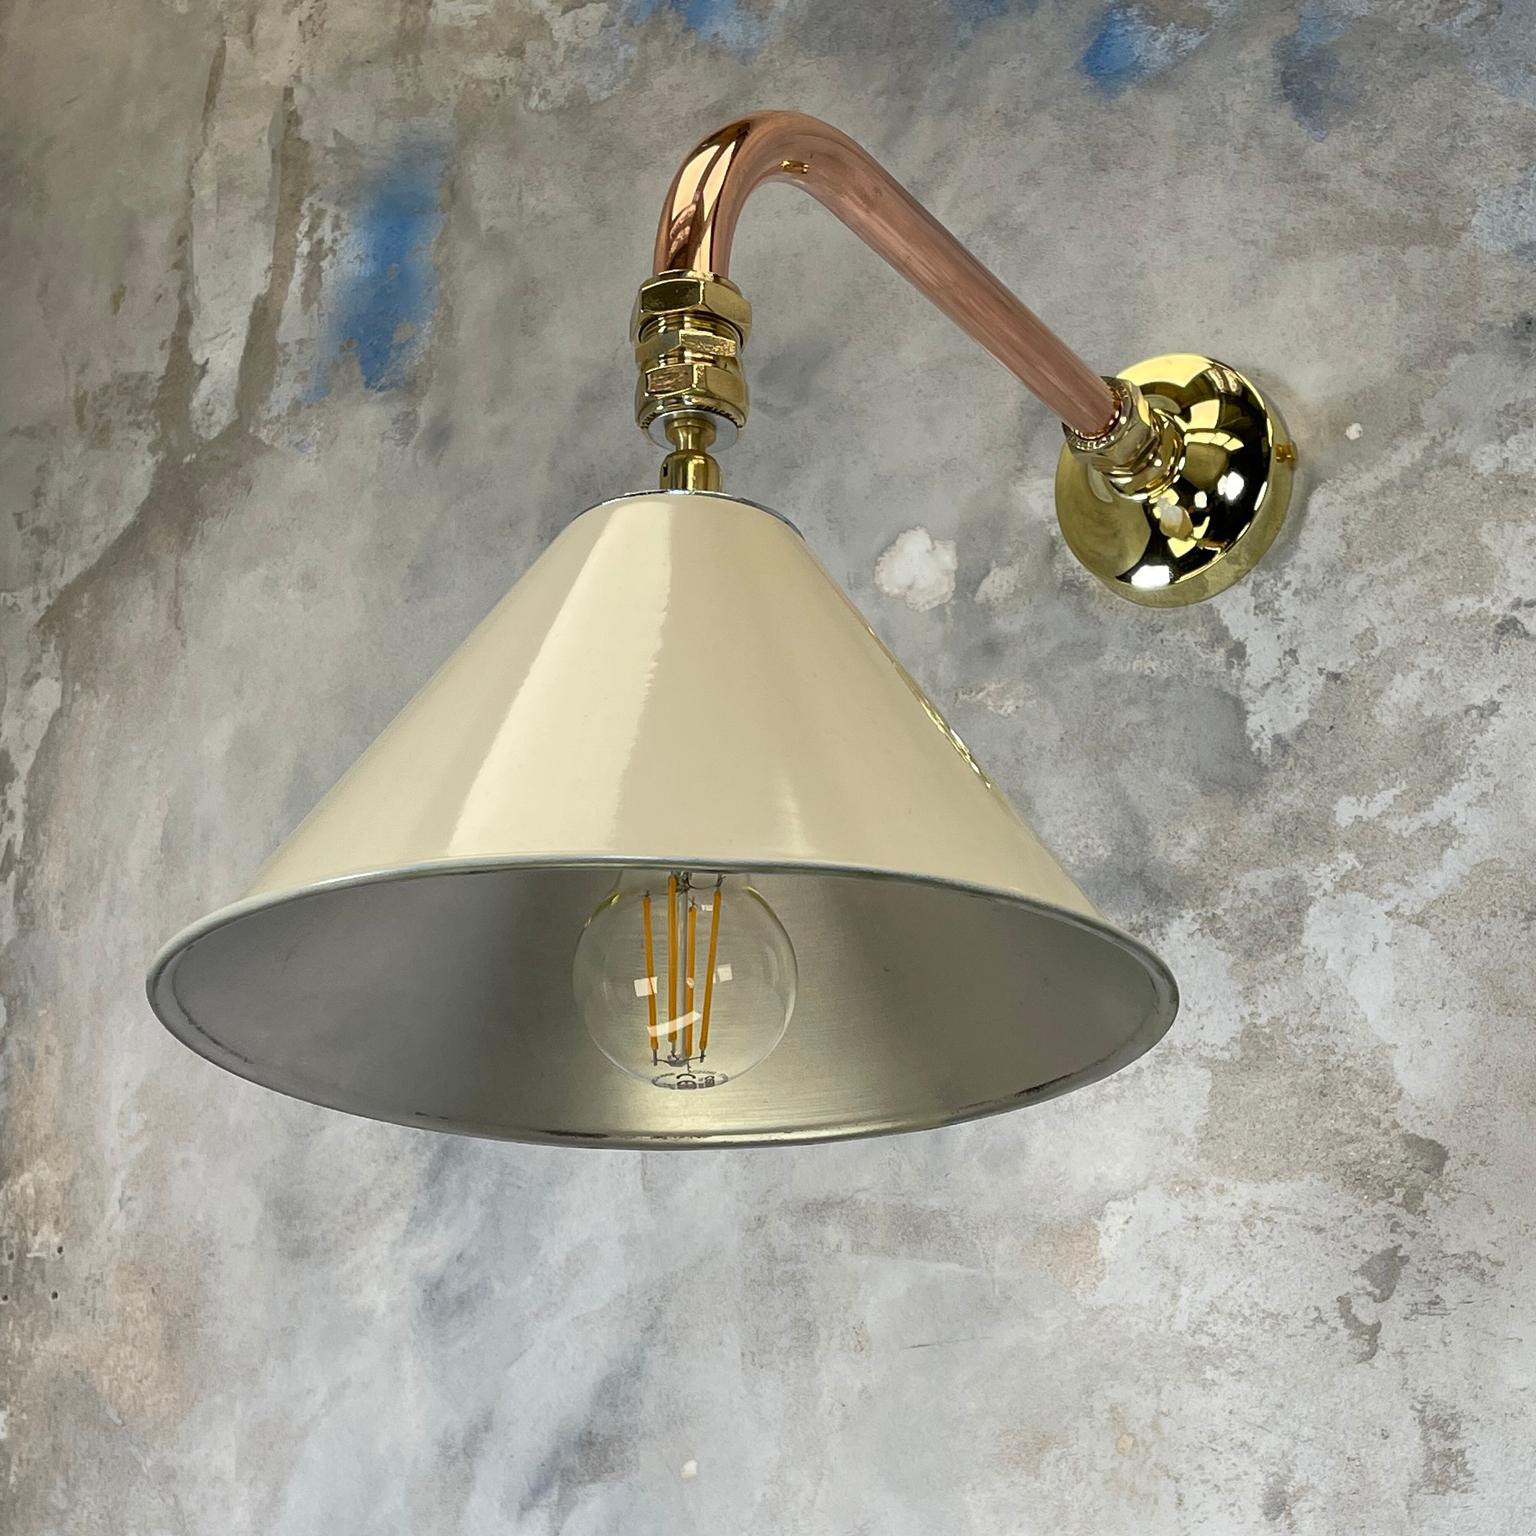 Spun 1980's Copper & Brass Cantilever Lamp Cream British Army Lamp Shade For Sale